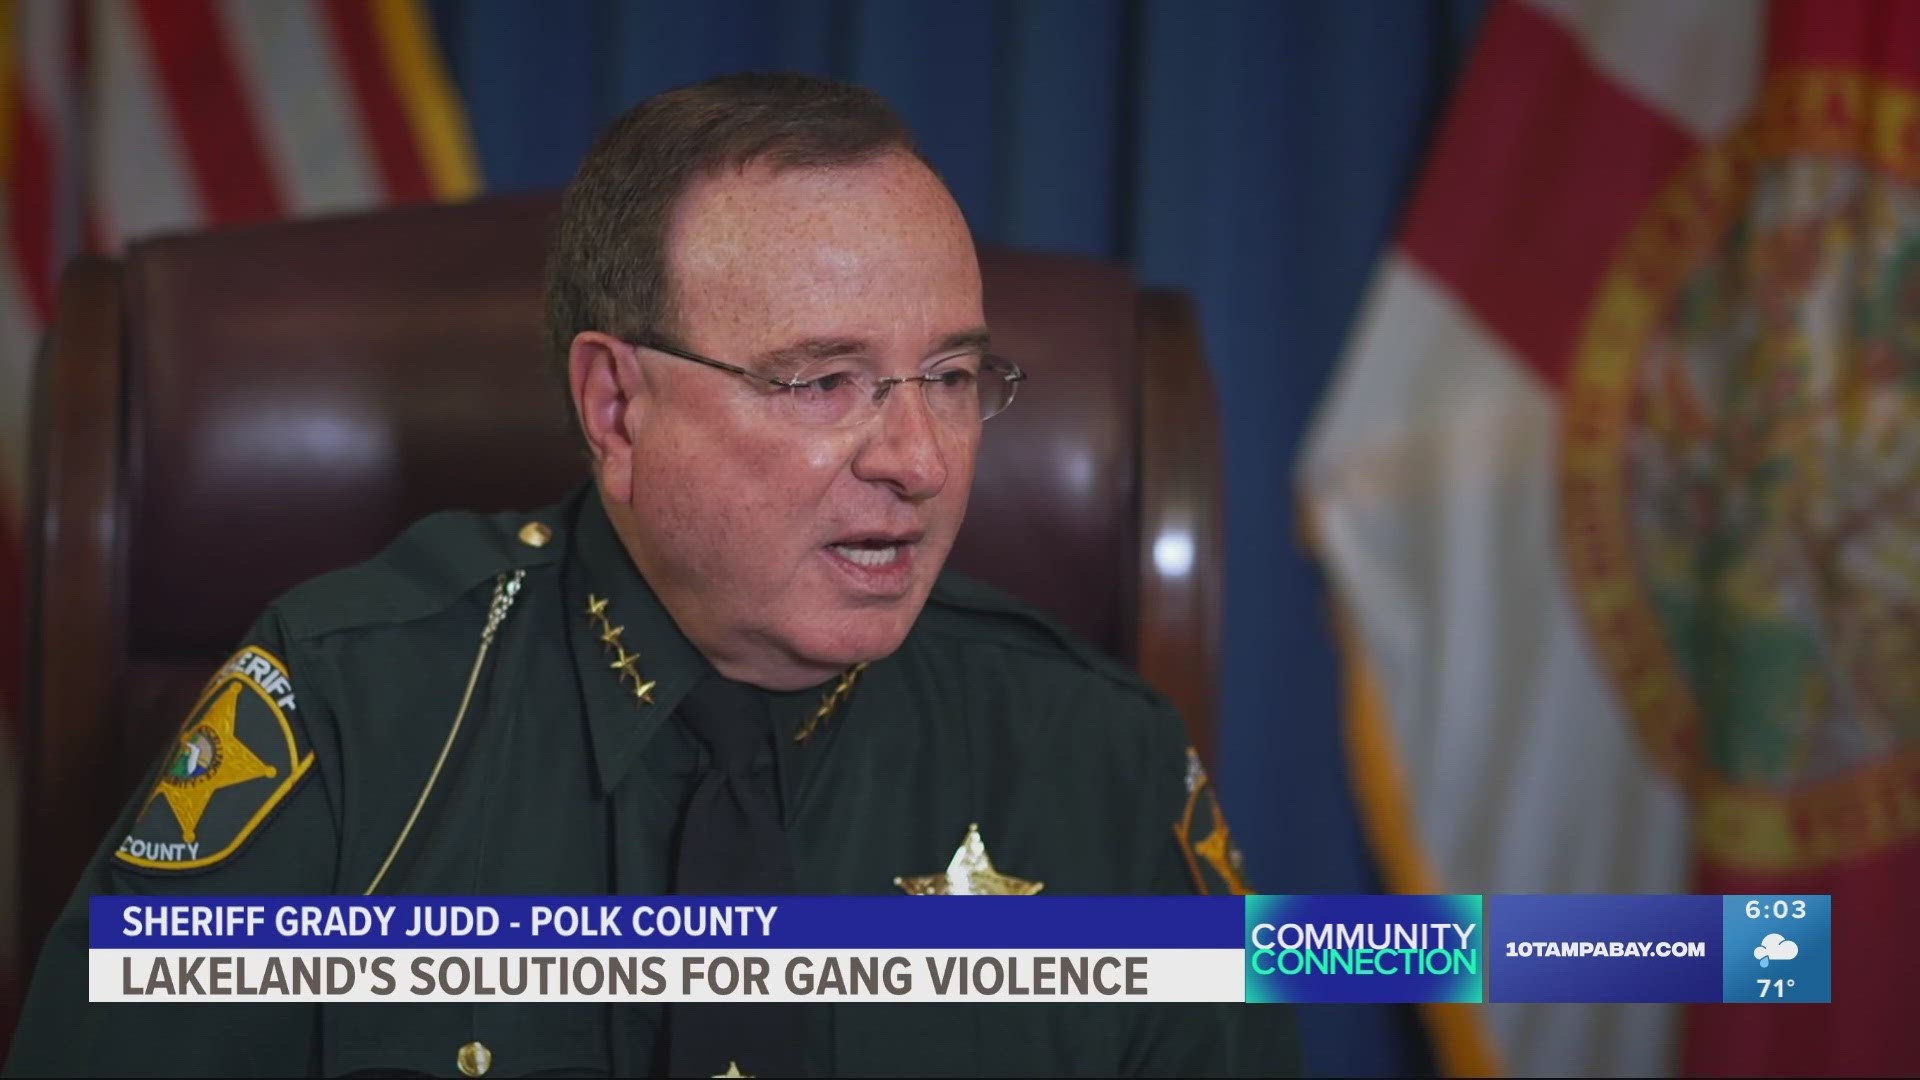 The Polk County Sheriff says they see the same problem every other town their size is dealing with. The difference he says is they’ve got solutions.